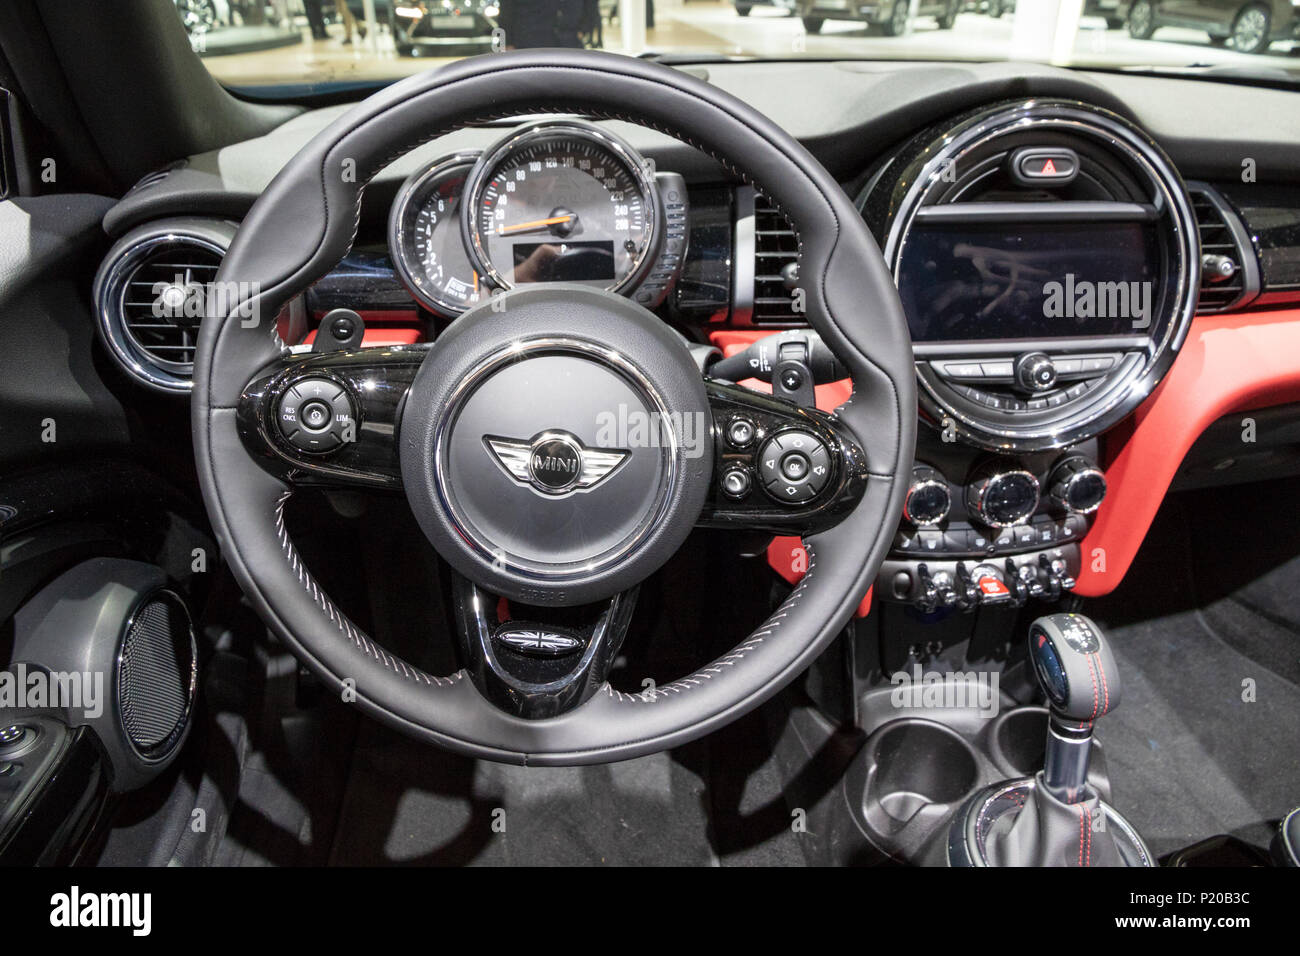 BRUSSELS - JAN 19, 2017: Interior of a Mini Cooper car showcased at the  Brussels Motor Show Stock Photo - Alamy